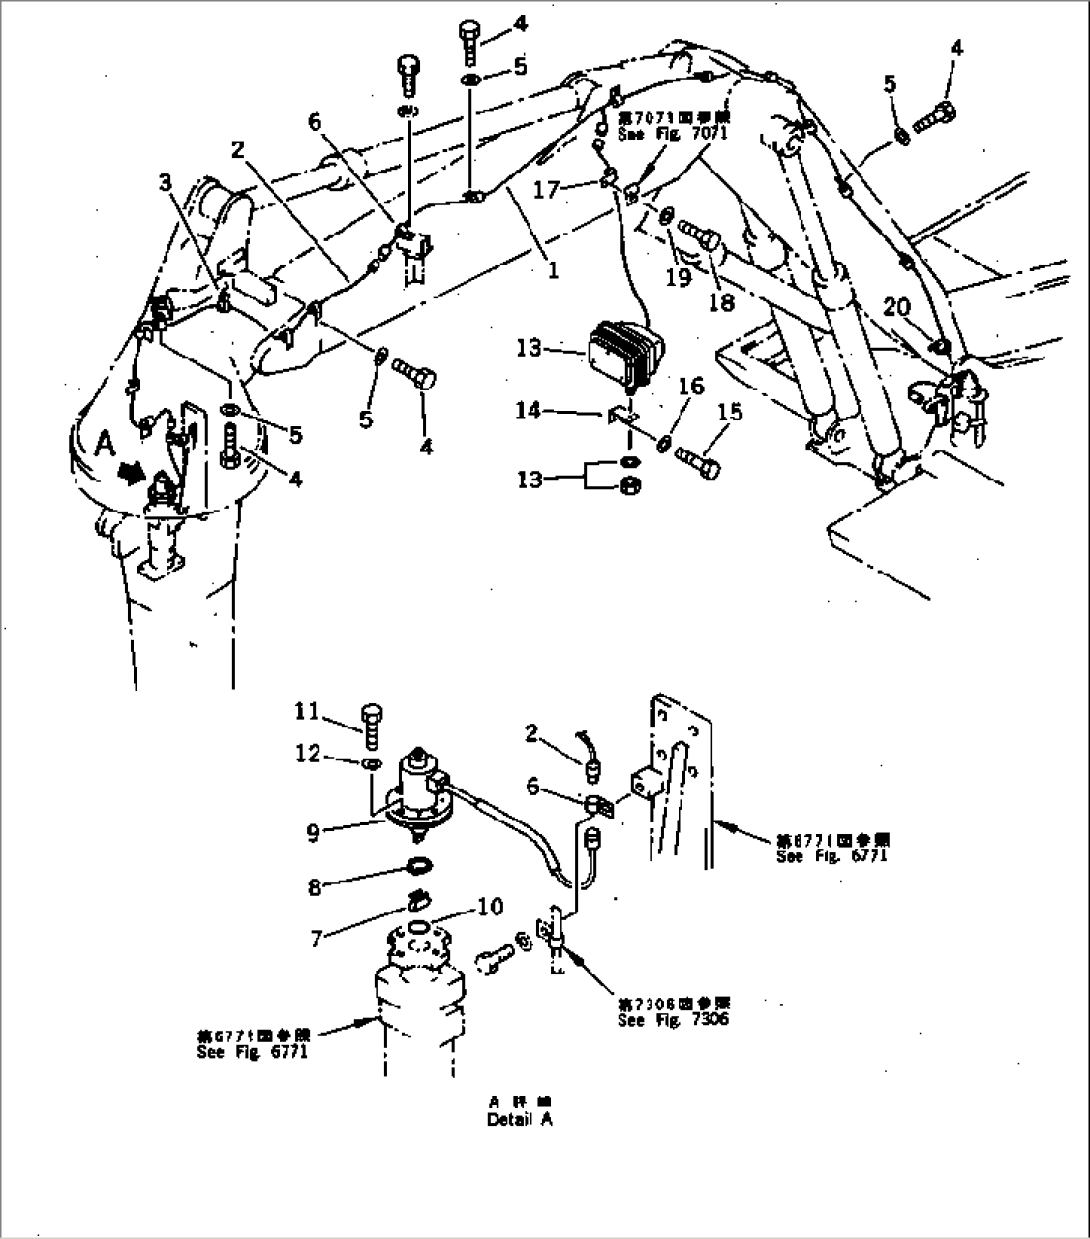 ELECTRICAL SYSTEM (WIRING) (ATTACHMENT SIDE)